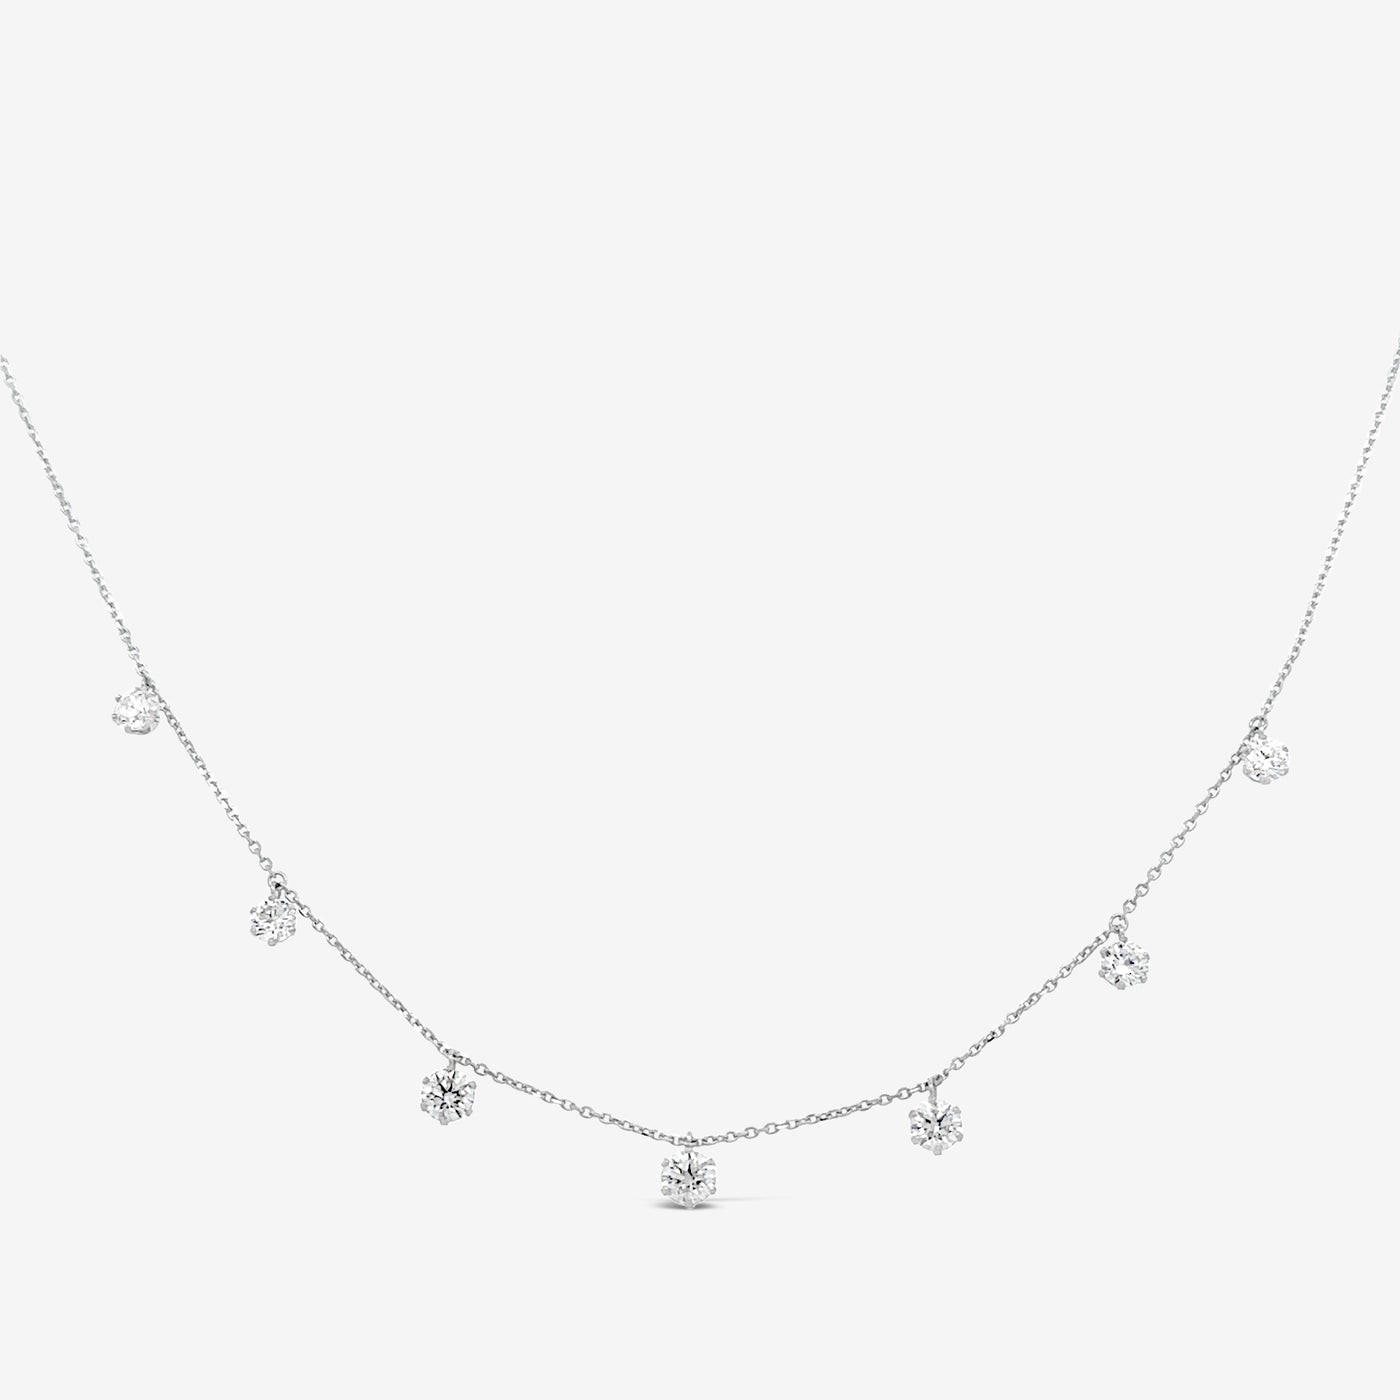 7 Drops By The Yard 1.50CT Diamond Necklace